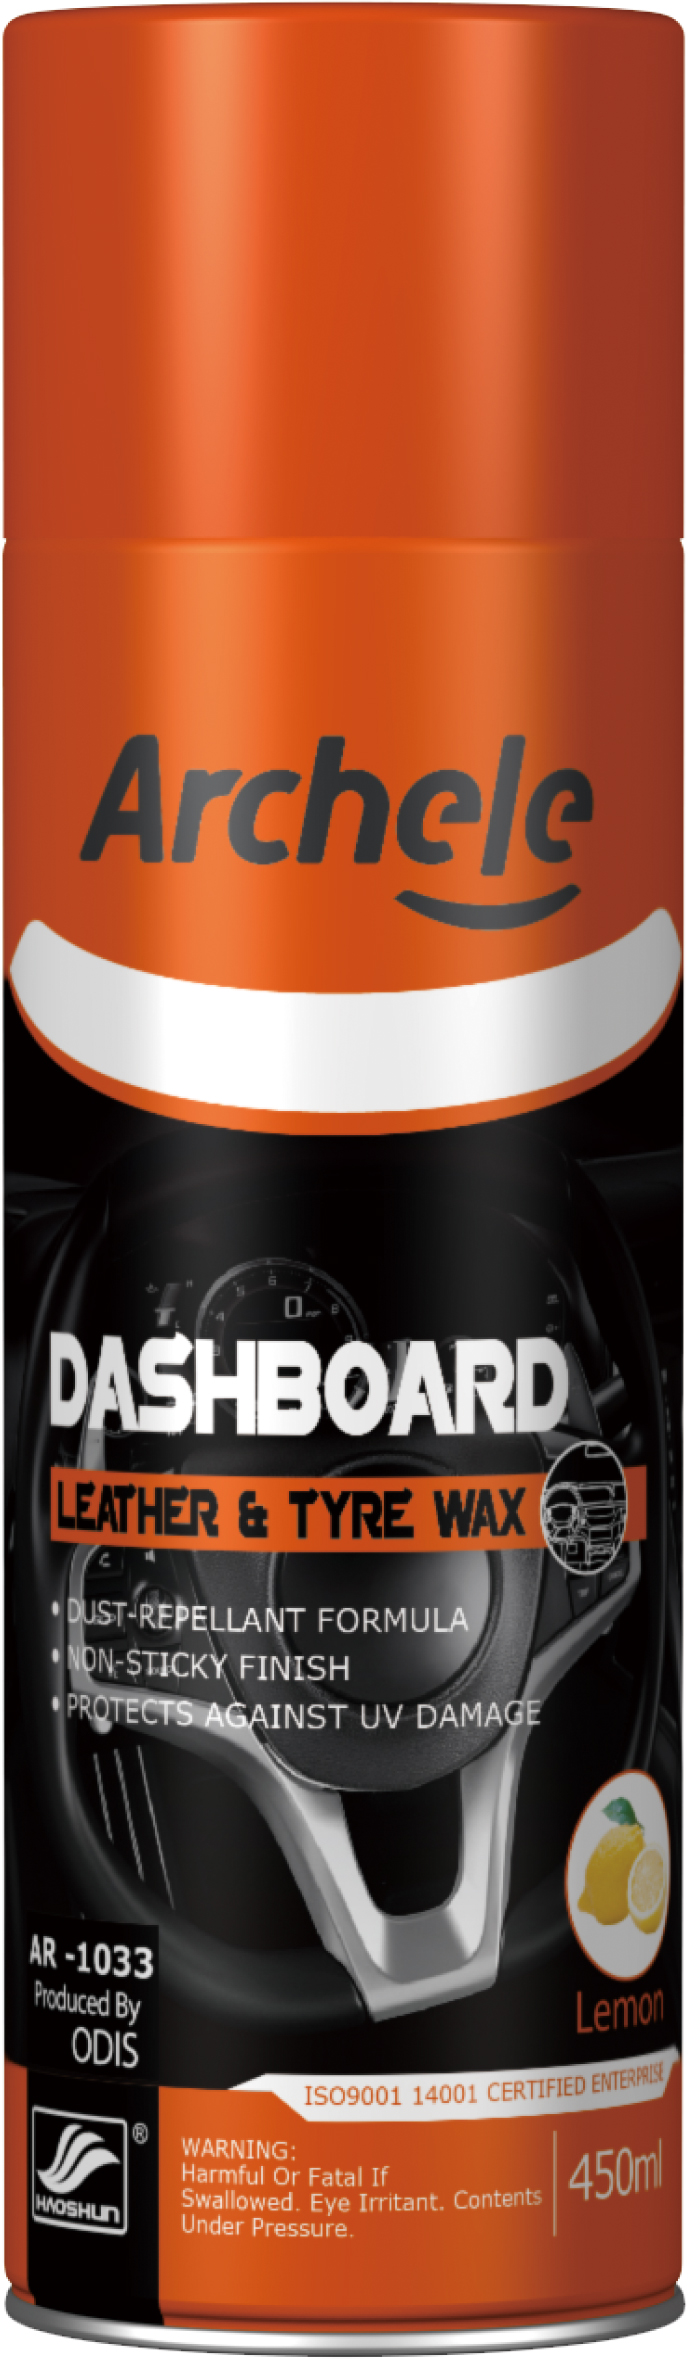 Dashboard Leather &Tyre Wax